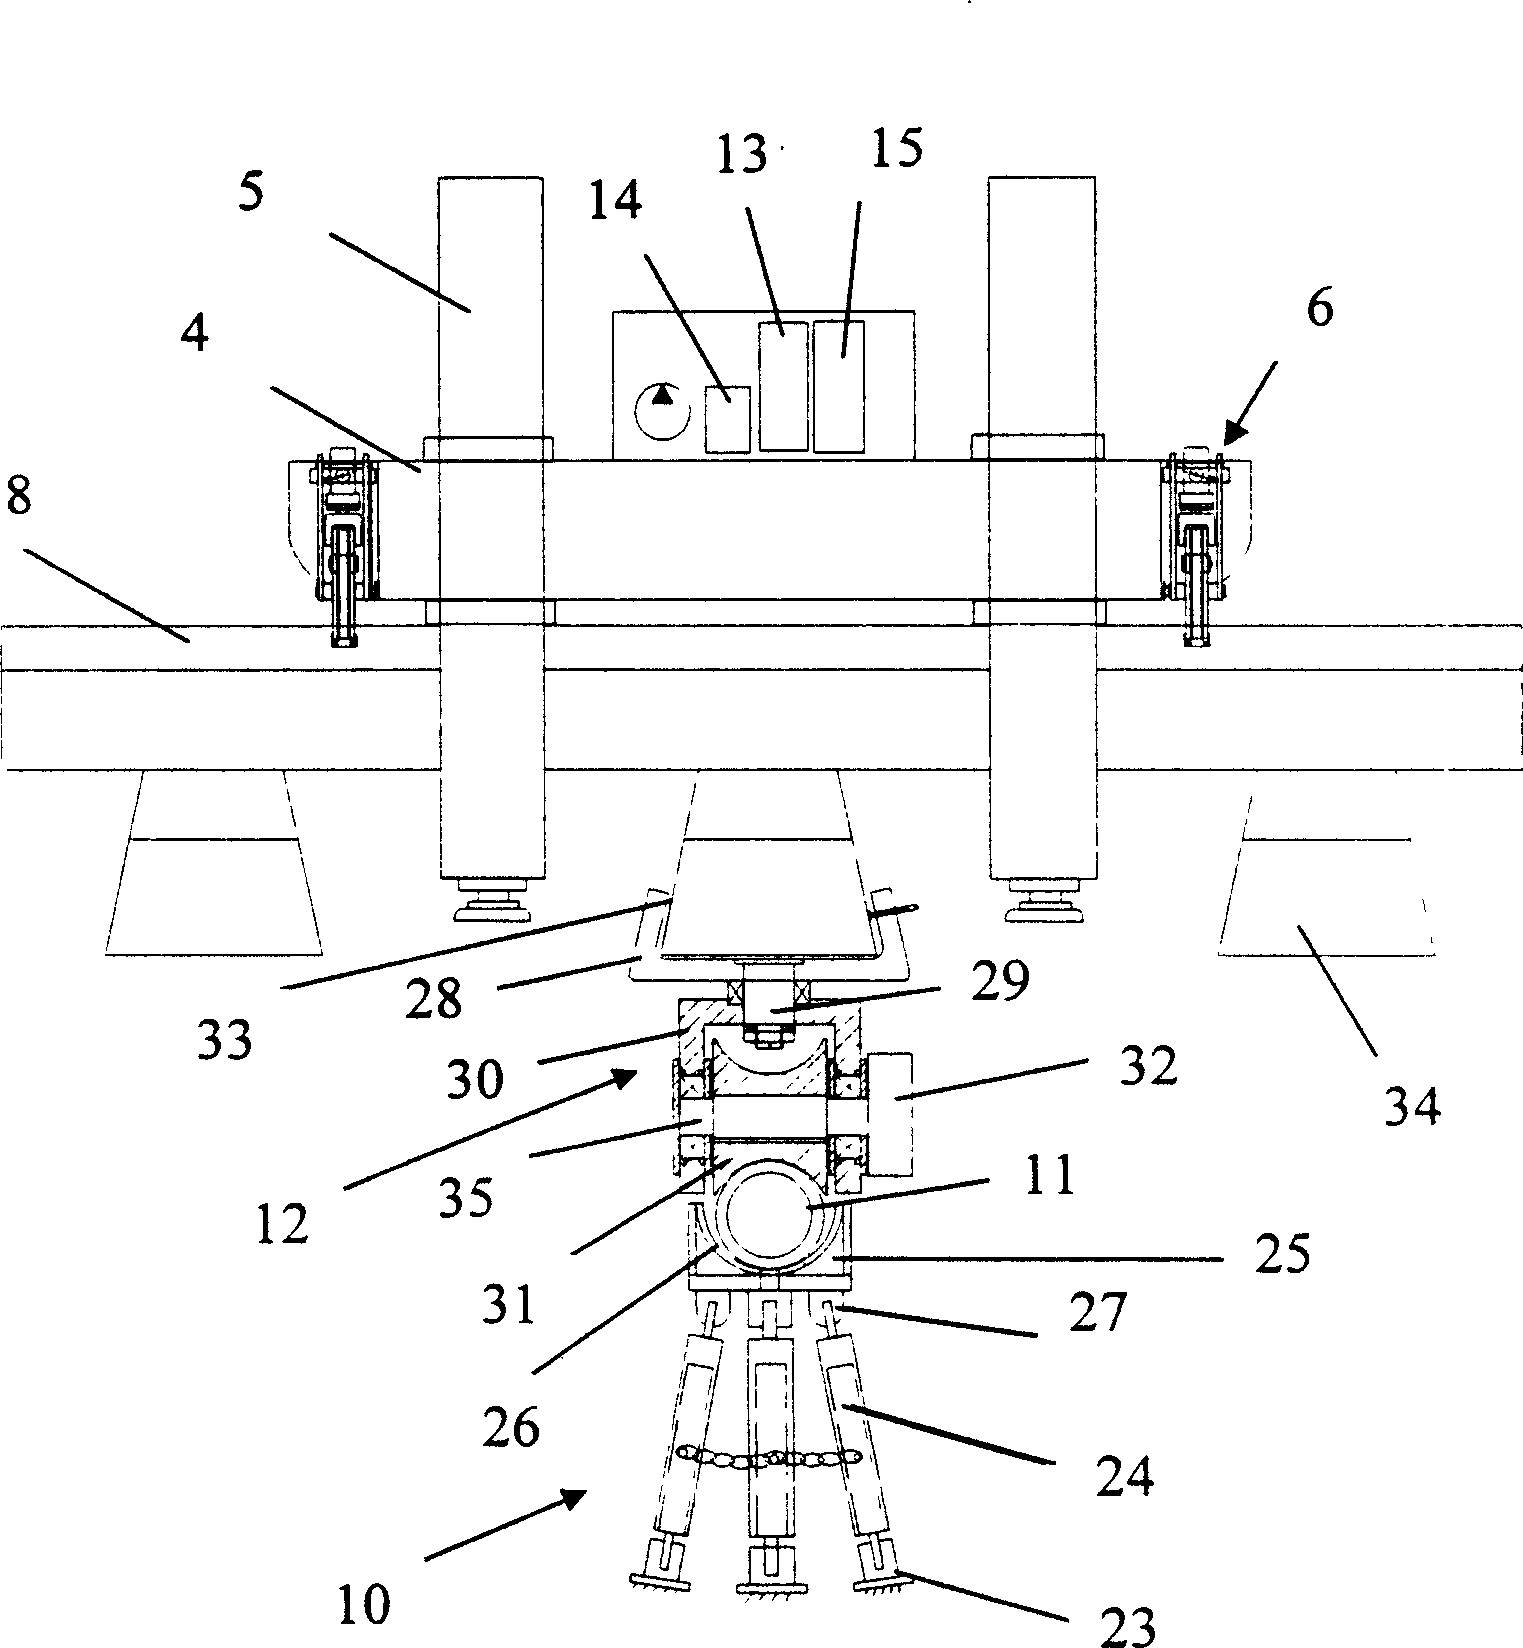 Longitudinal and transverse moving device for switch and rail row